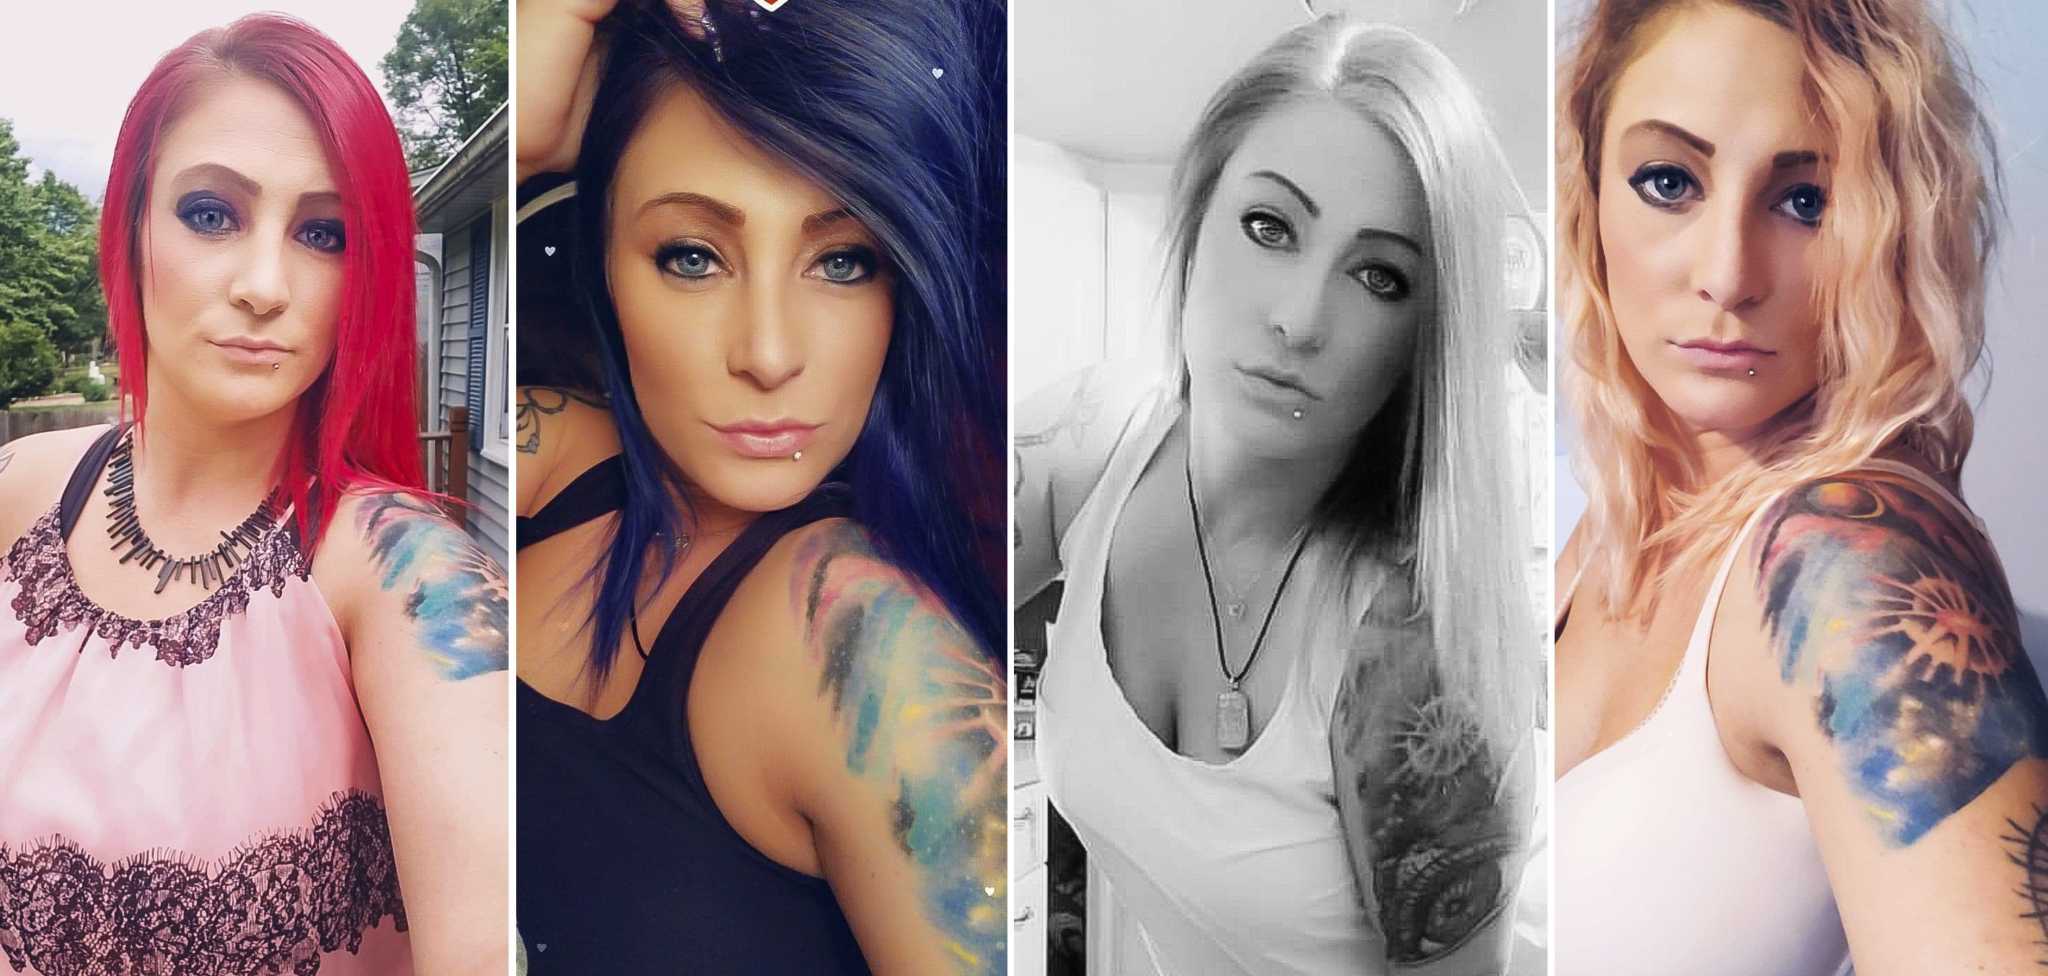 Midland S Cover Girl Green Featured In Inked Magazine Cover Contest